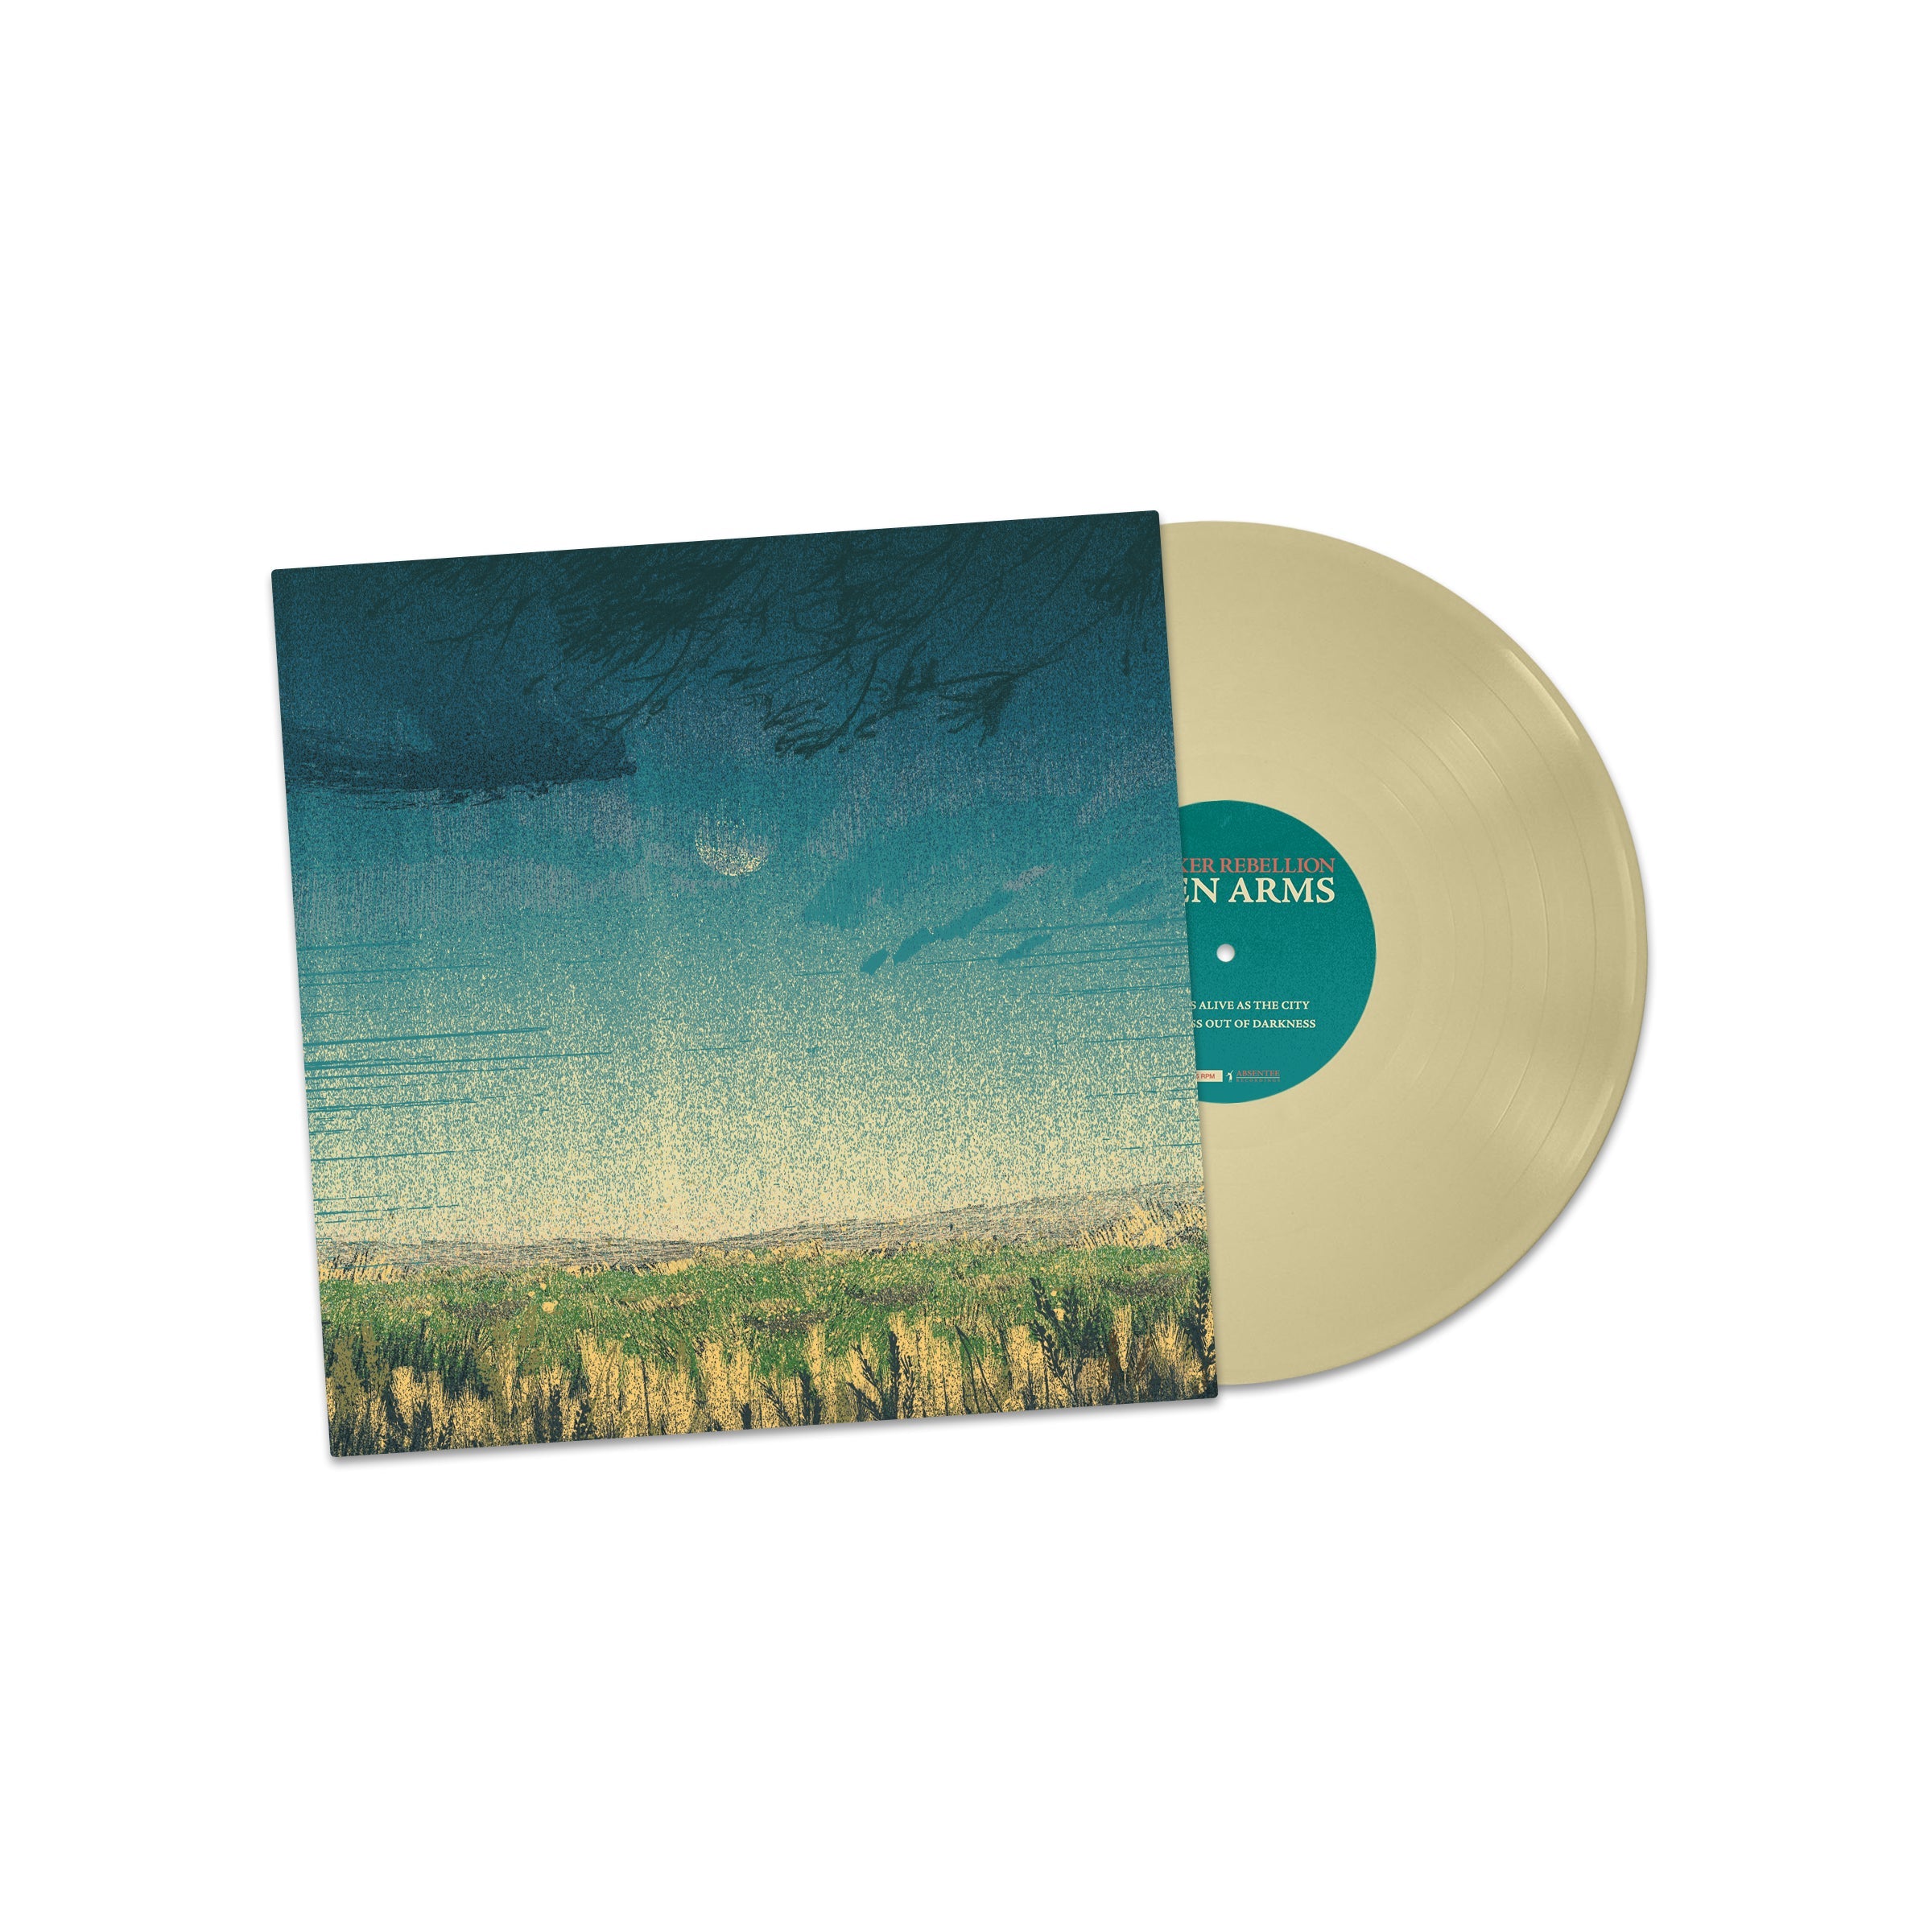 Open Arms: Limited Cream Vinyl EP & Signed Print